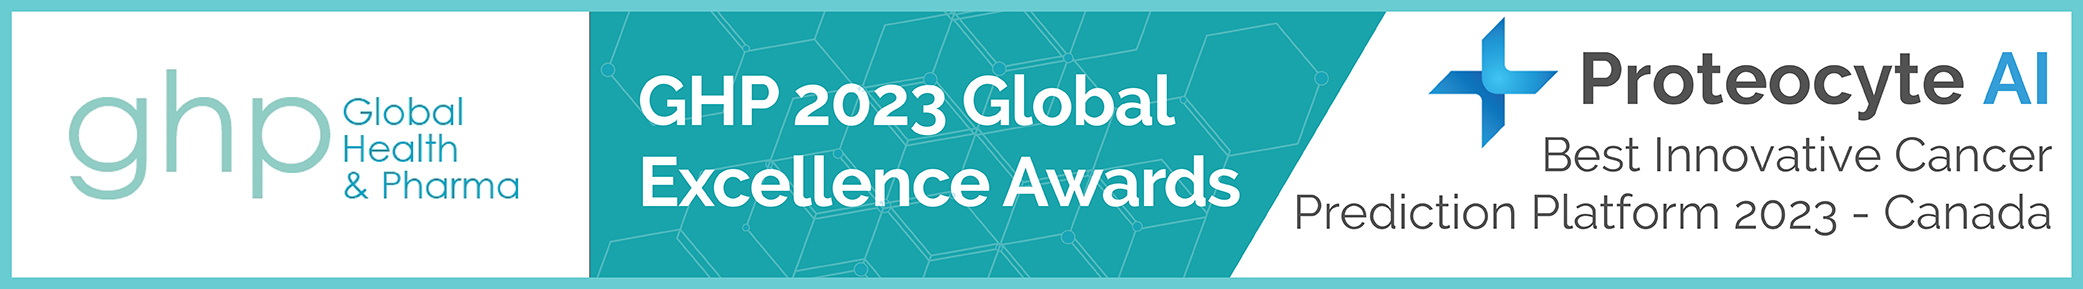 GHP 2023 Global Excellence Awards Banner.